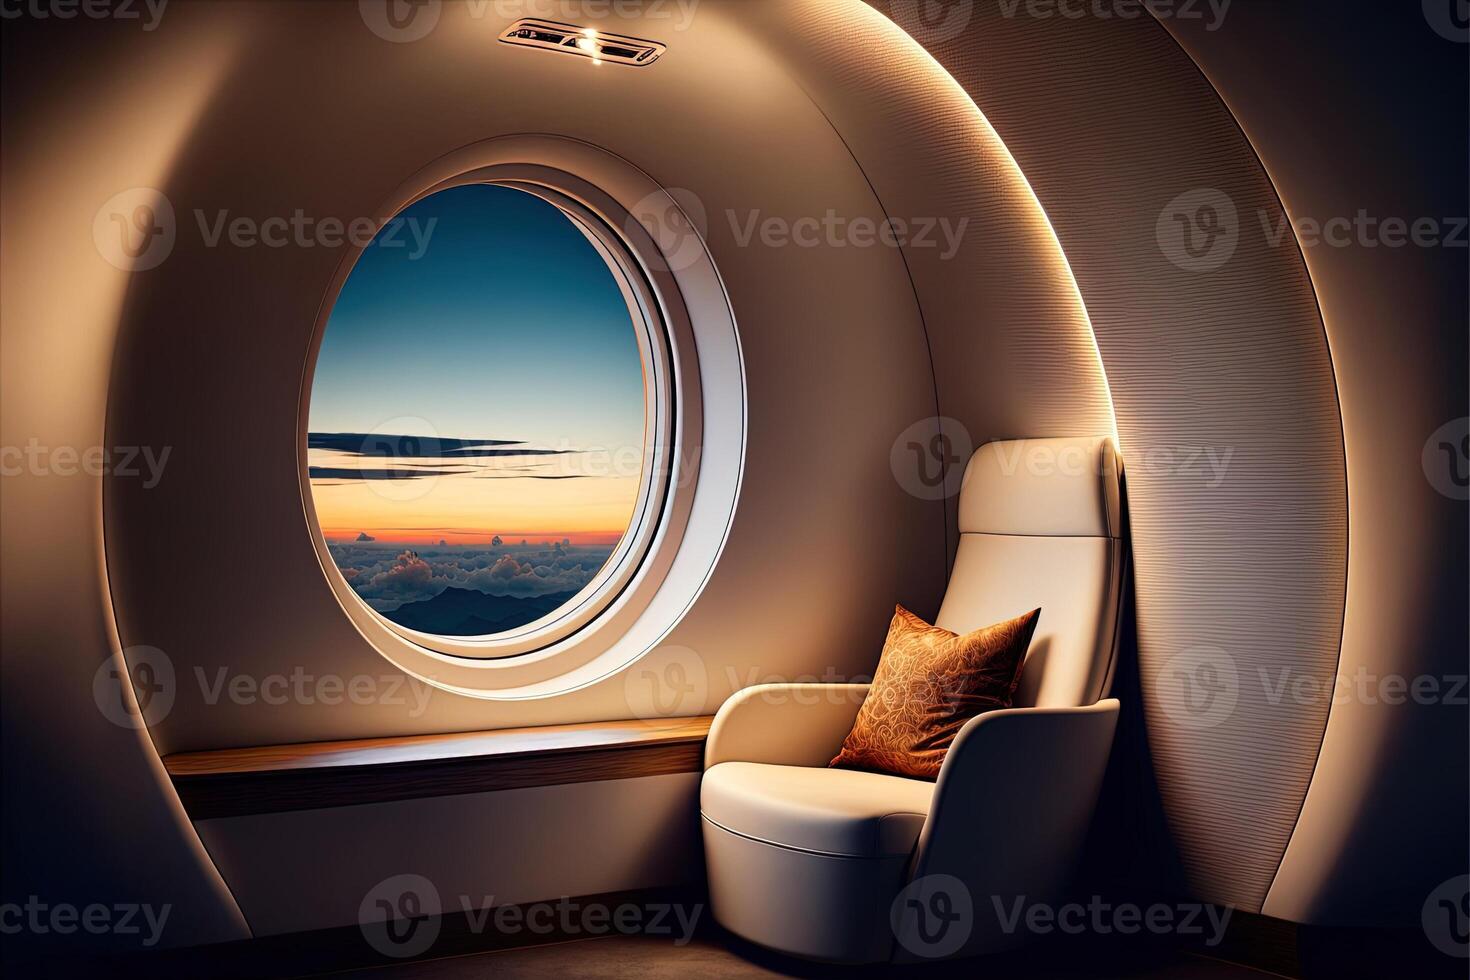 Luxurious first class airplane seat with lots of windows. visualization of the VIP cabin of a business class aircraft. Interior of a Private Jet photo